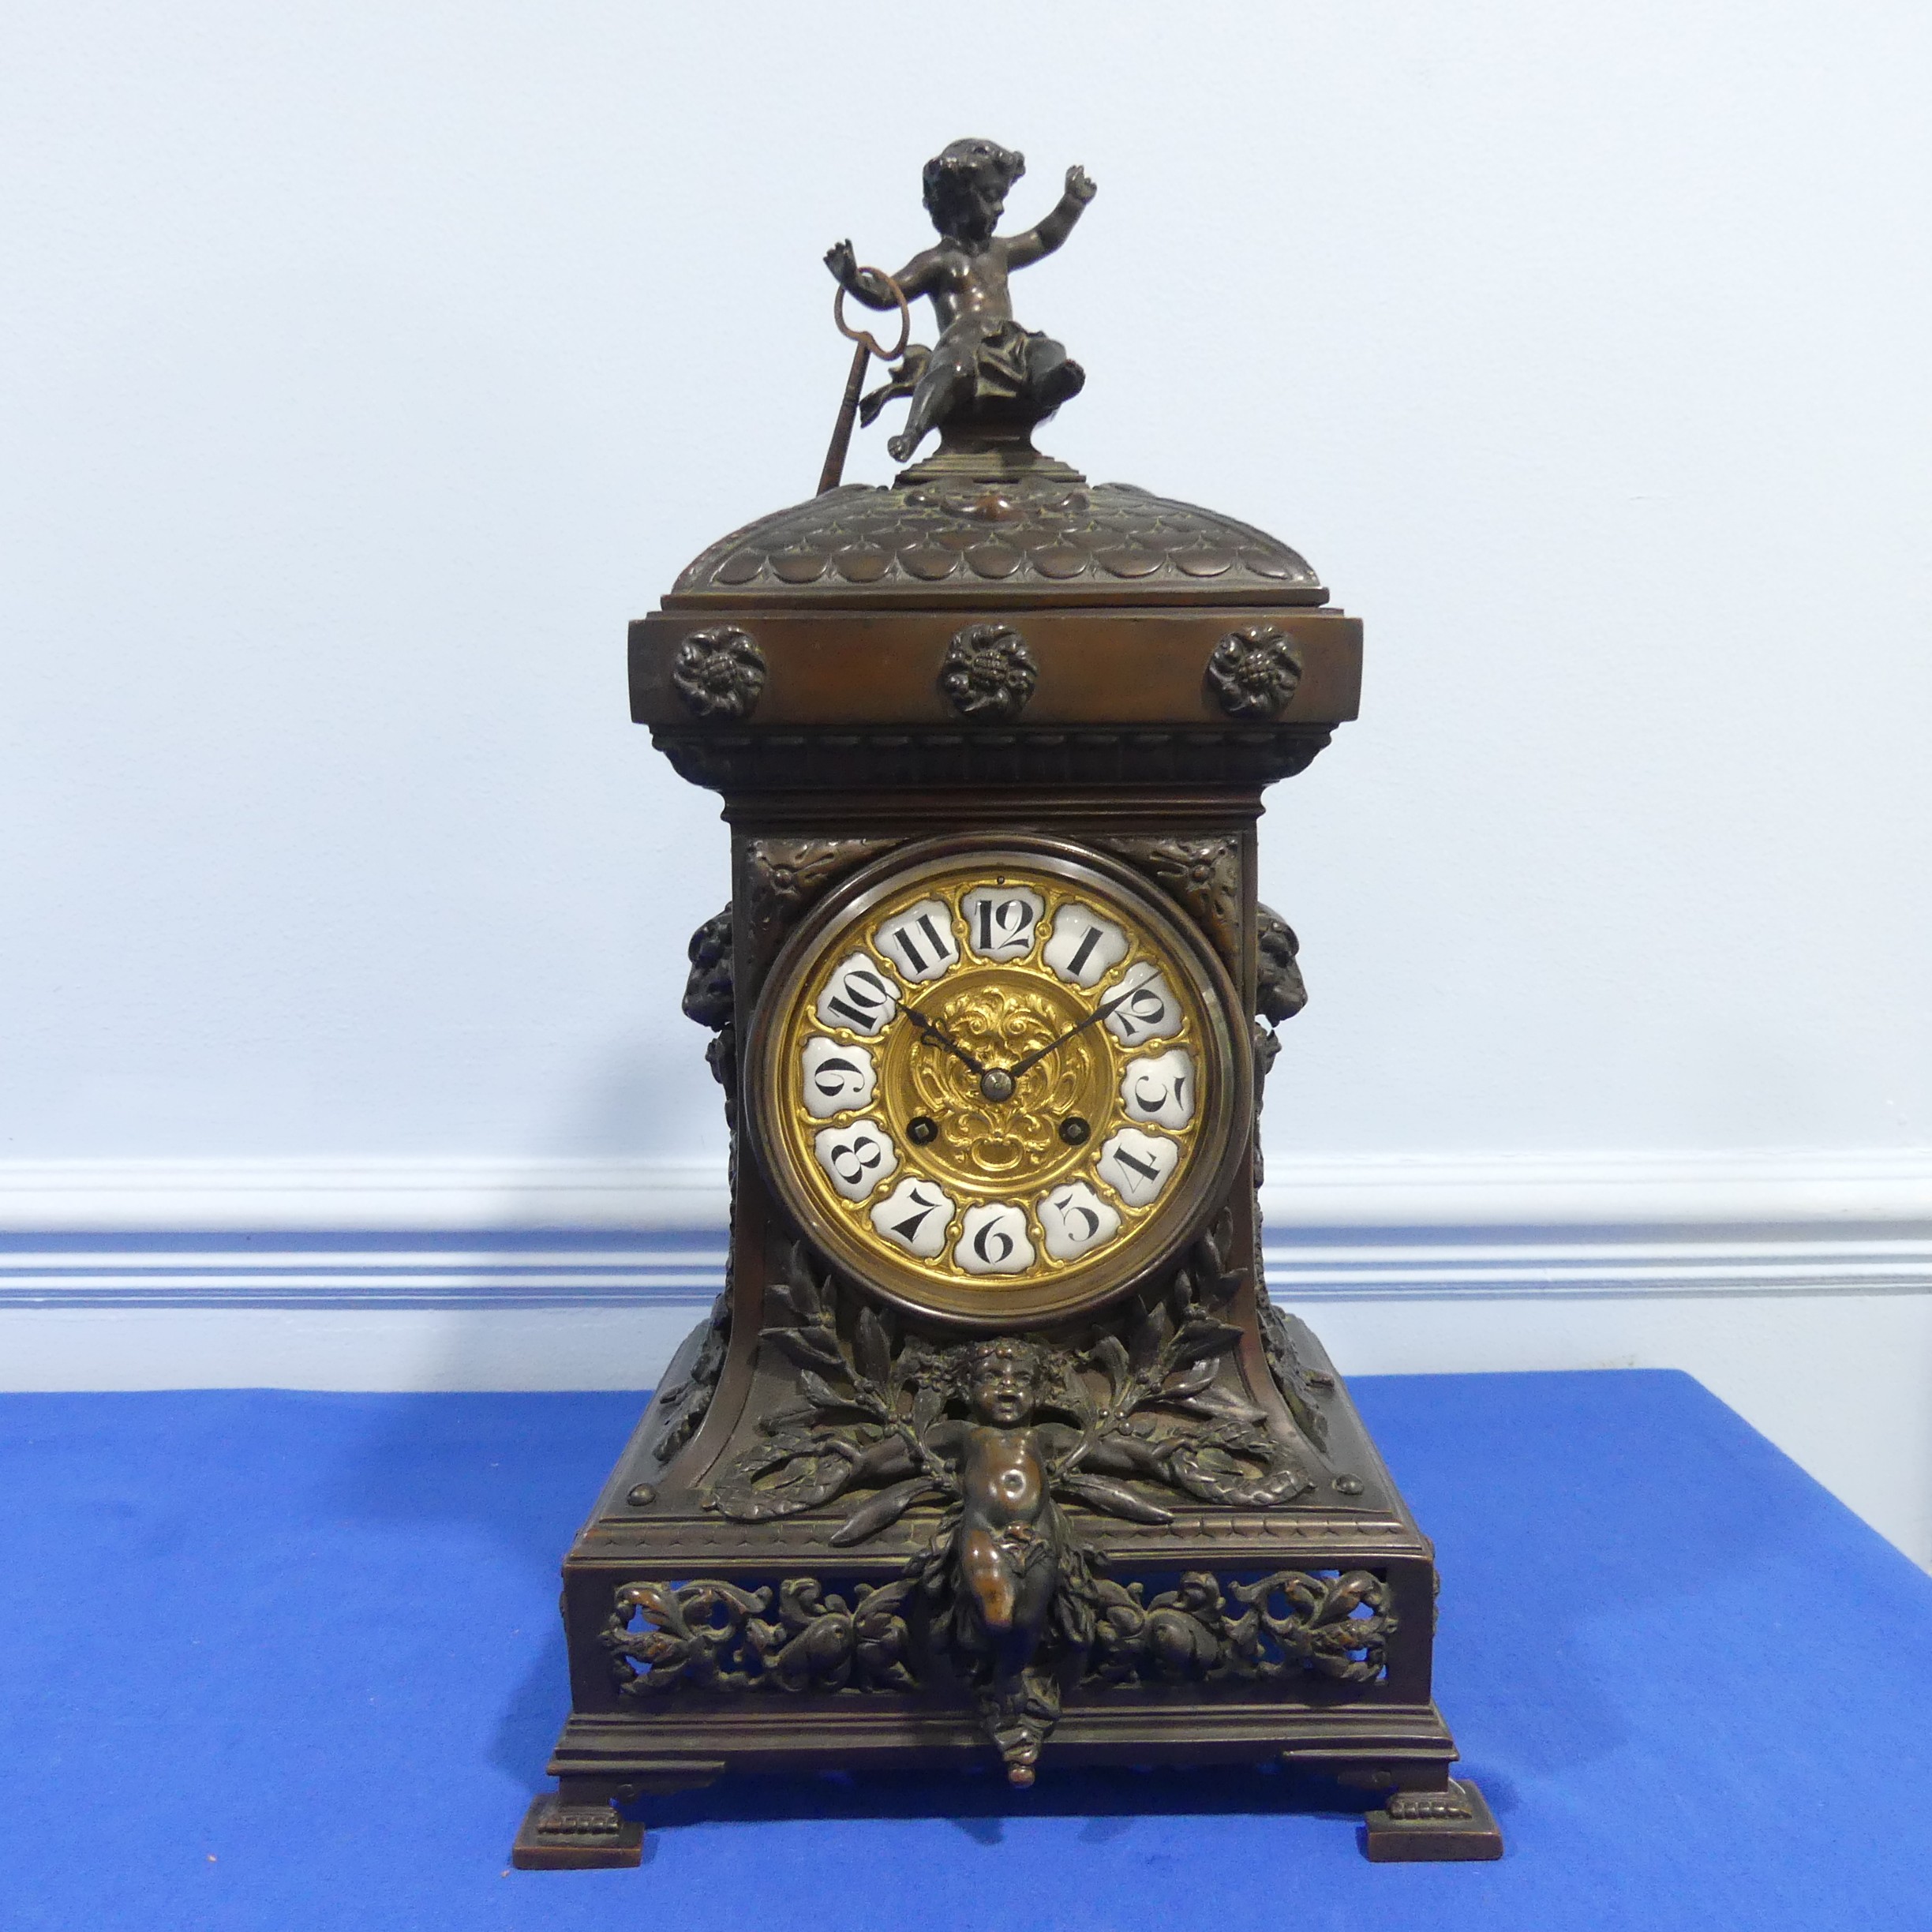 A French bronzed-metal Mantel Clock, late 19th century, the architectural case surmounted with an